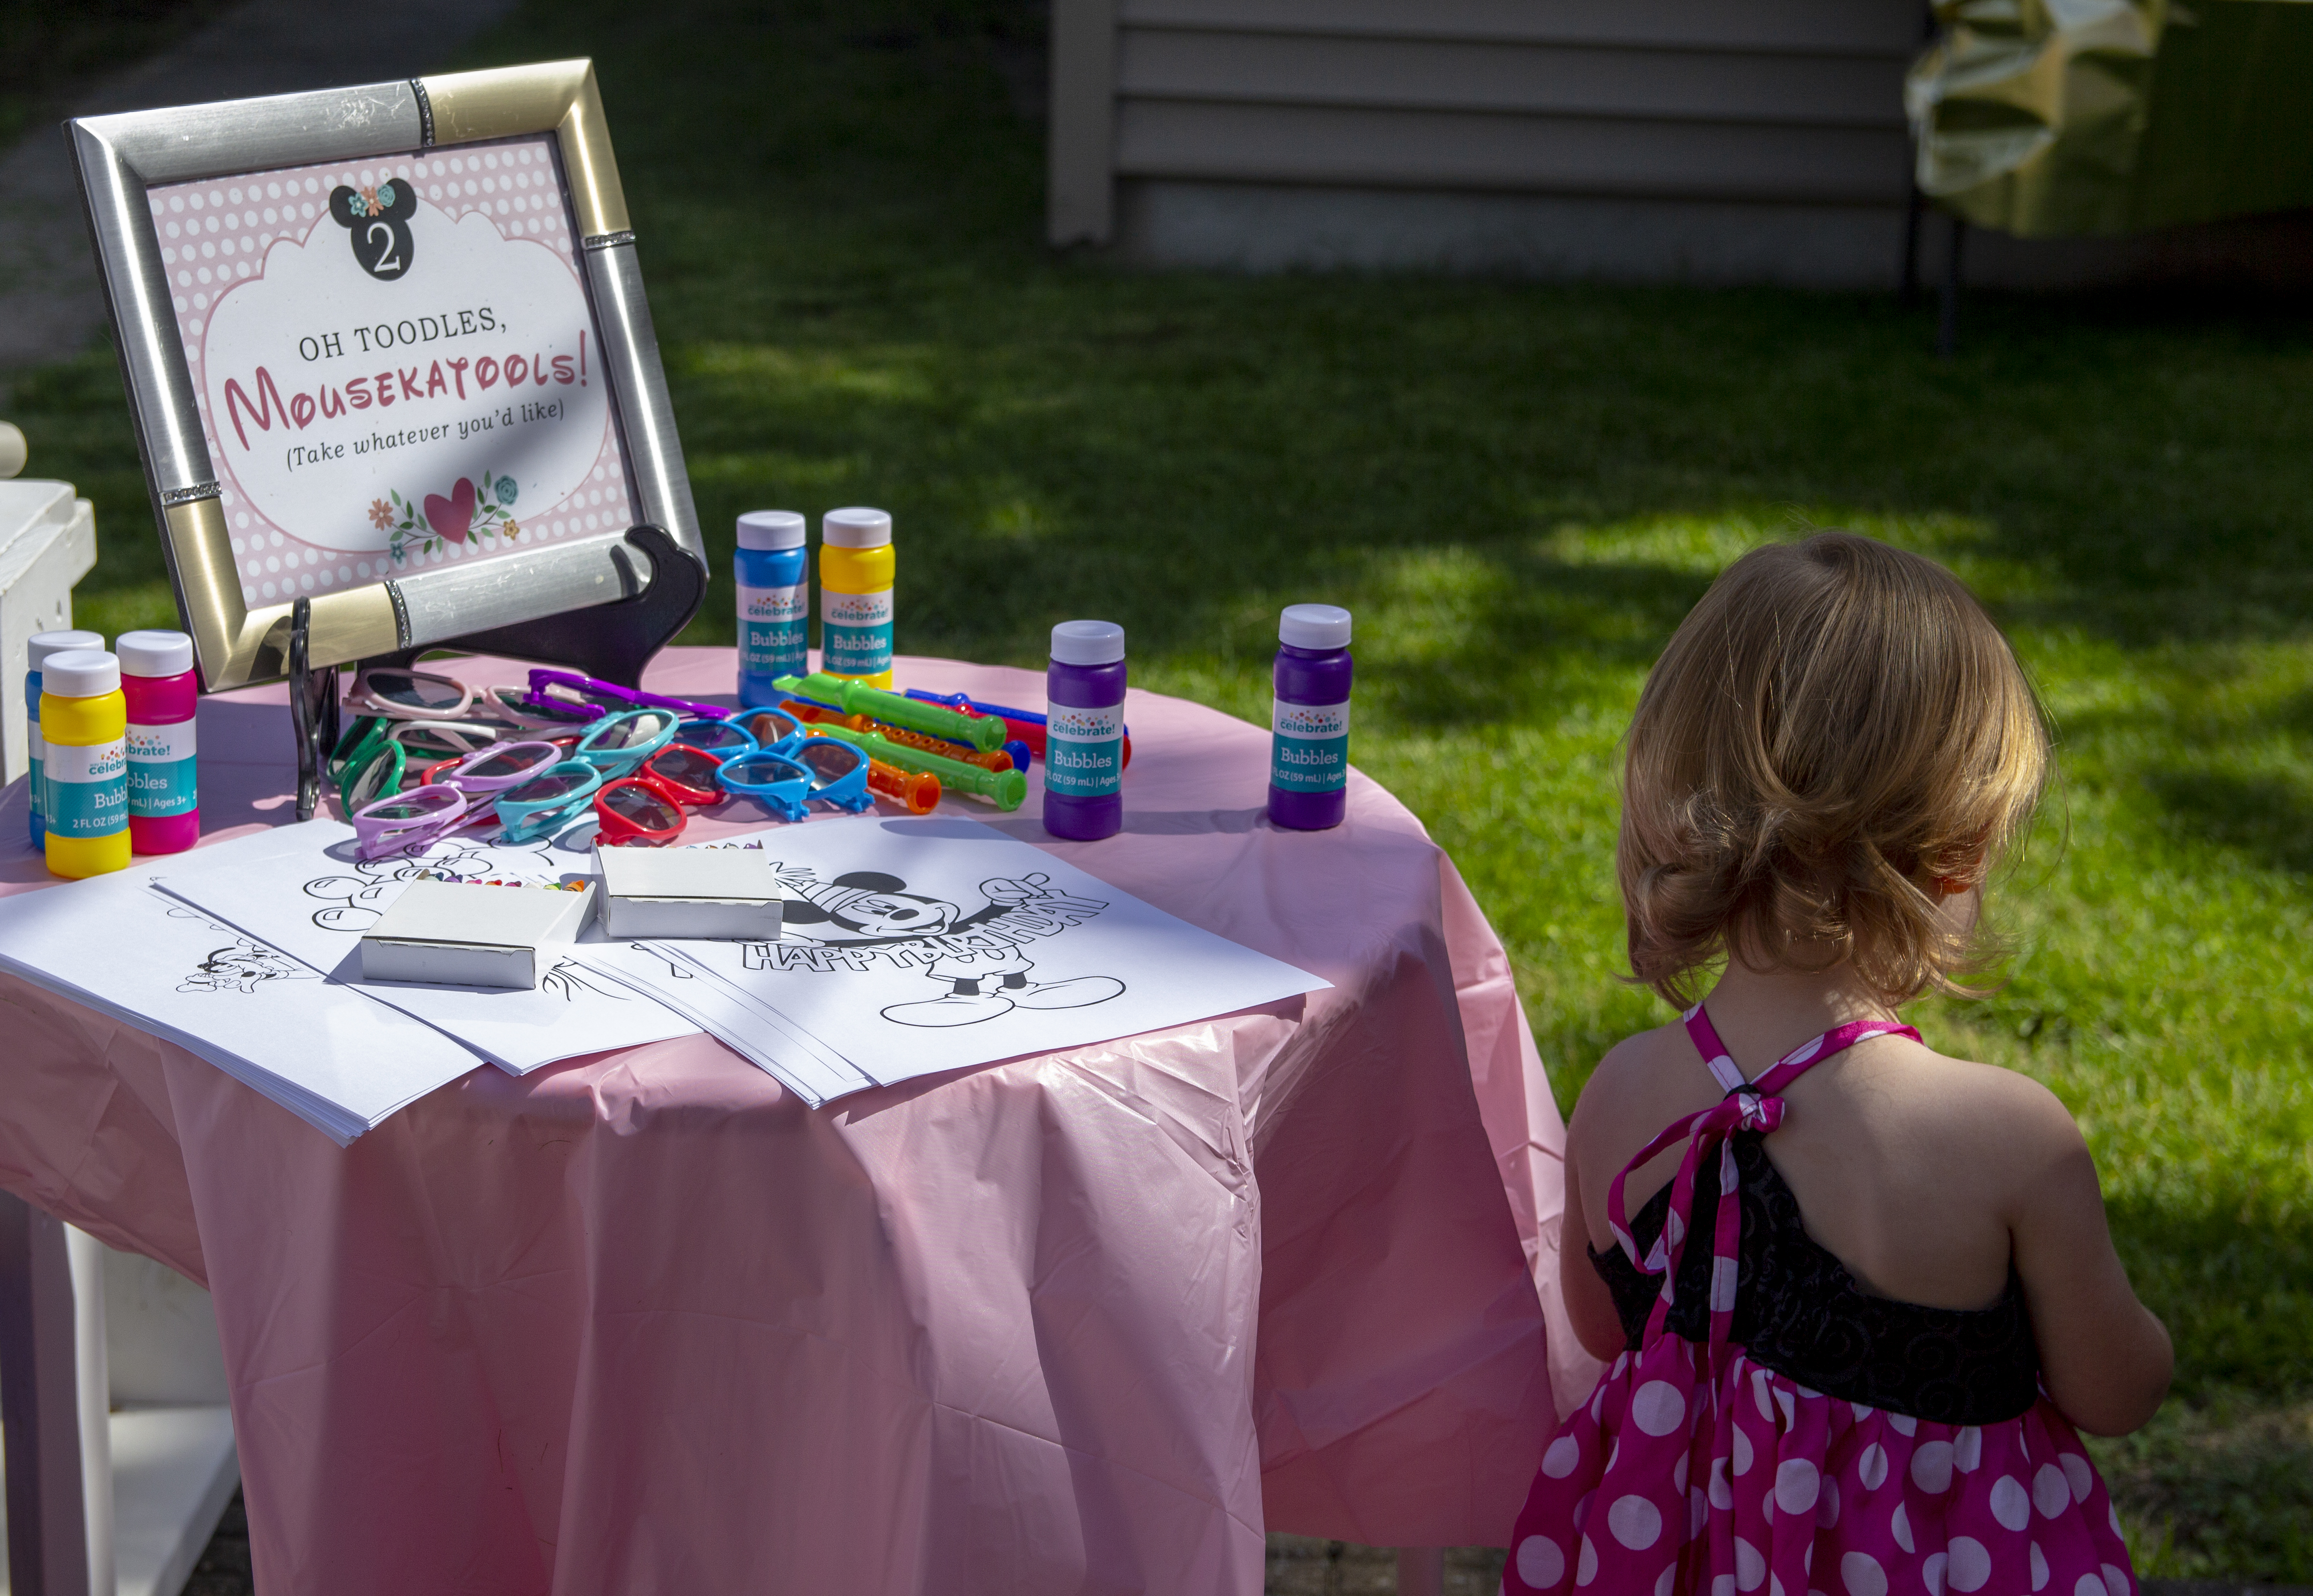 Table with games and party favors for 2 year old minnie mouse birthday party